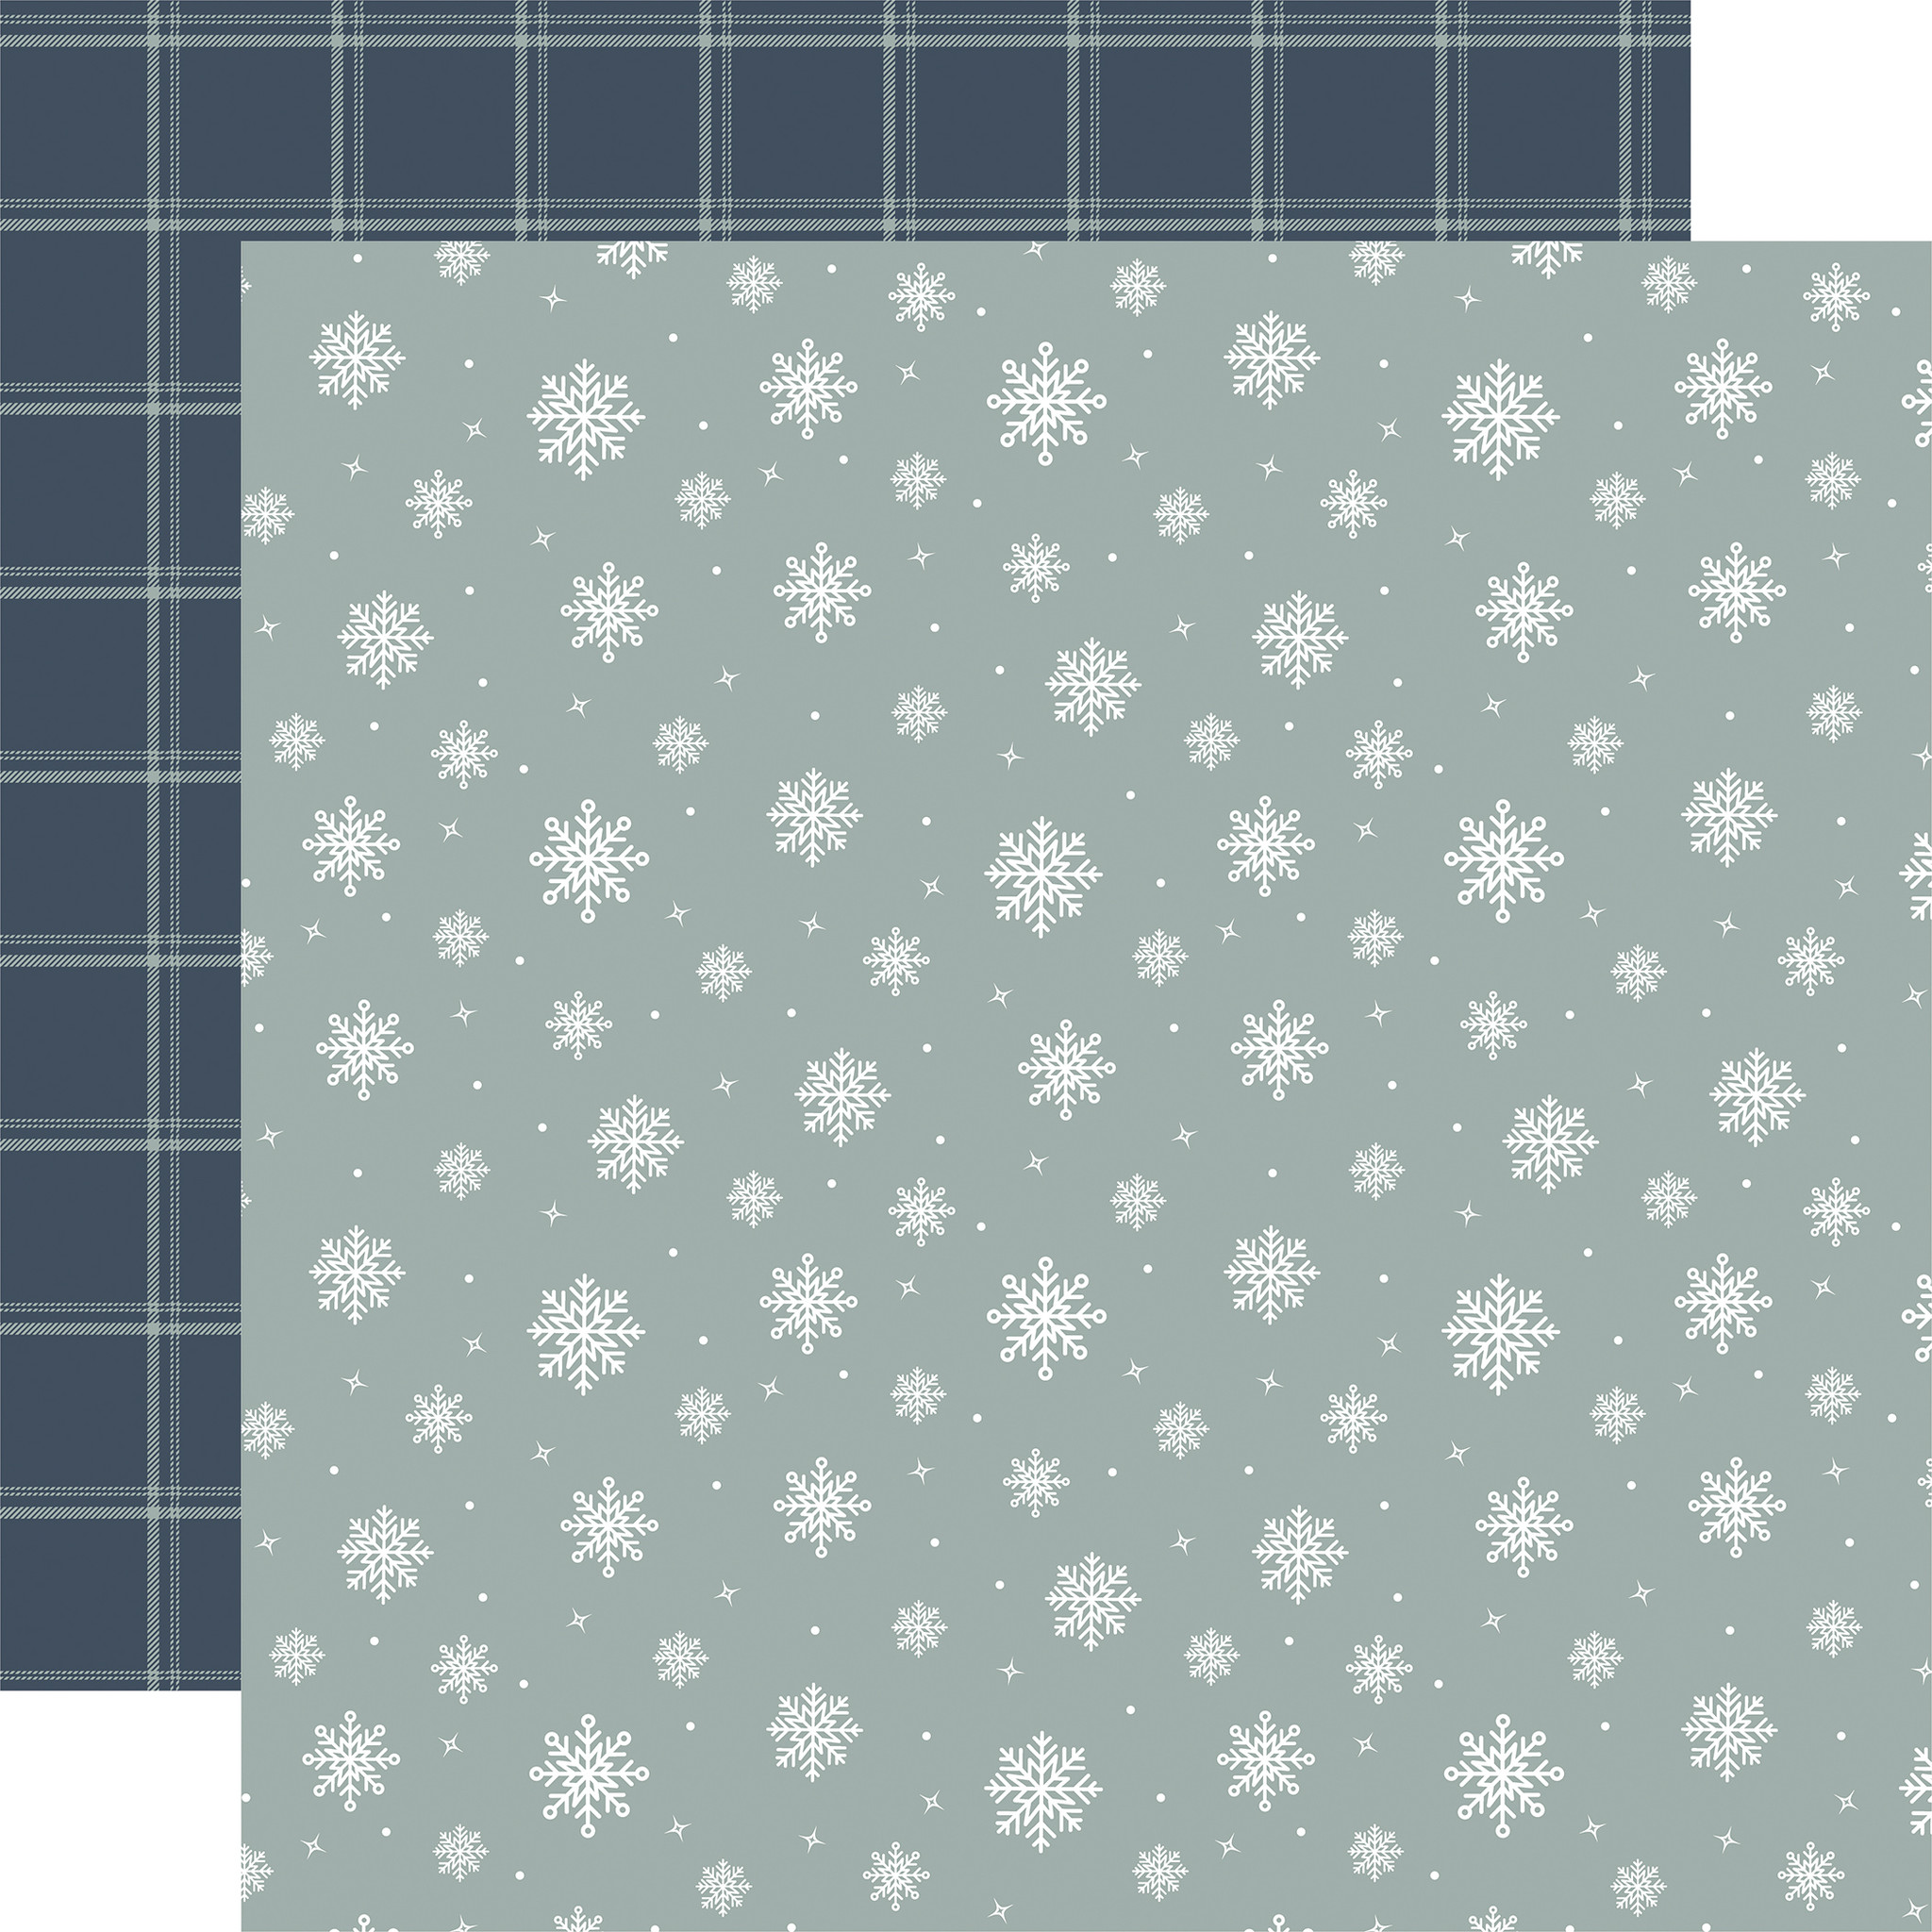 Winterland: Welcome Winter 12x12 Patterned Paper